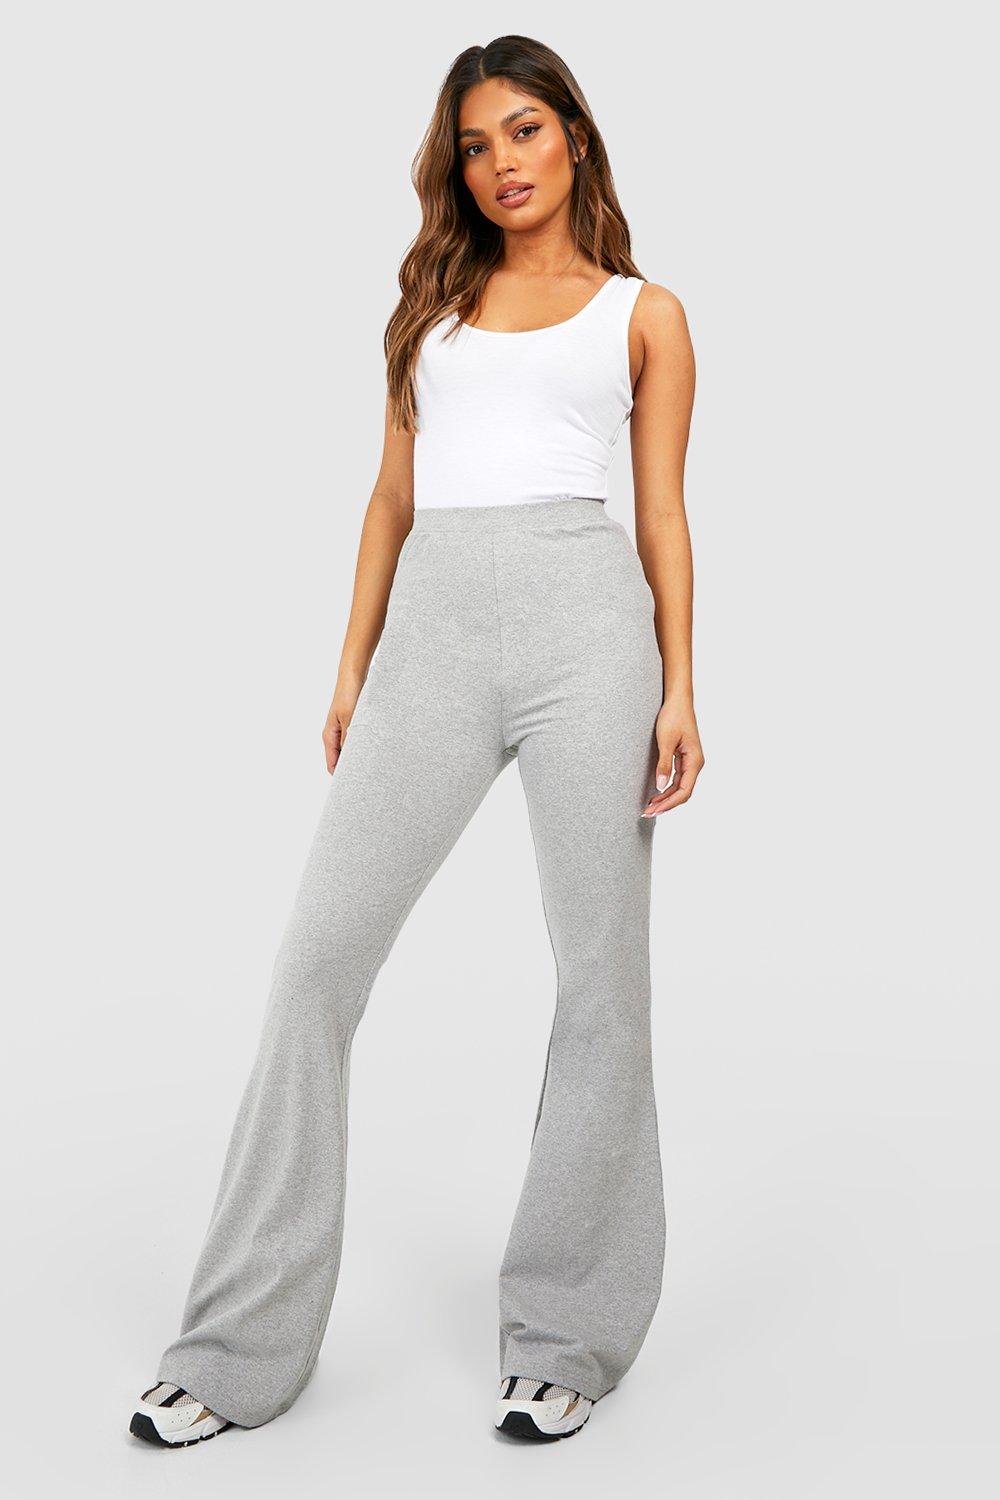 Cotton 2 Pack Black & Grey High Waisted Flared Pants